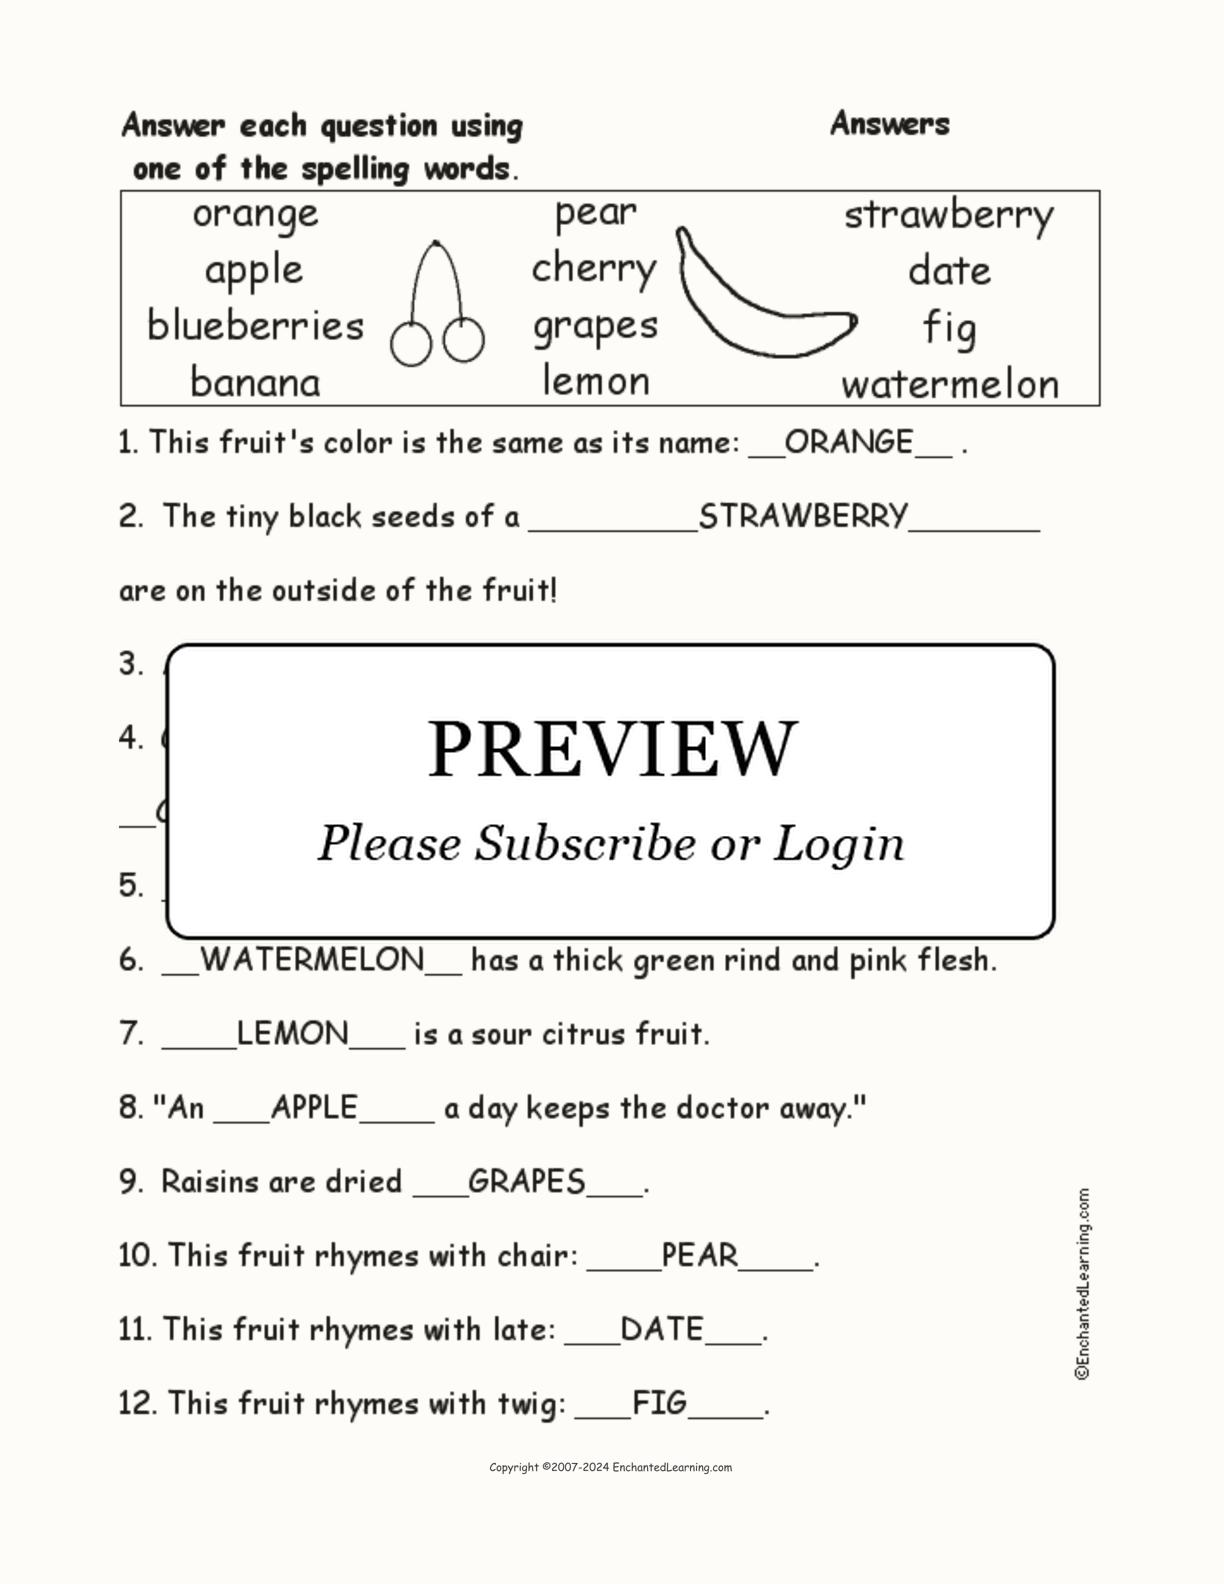 Fruit Spelling Word Questions interactive worksheet page 2